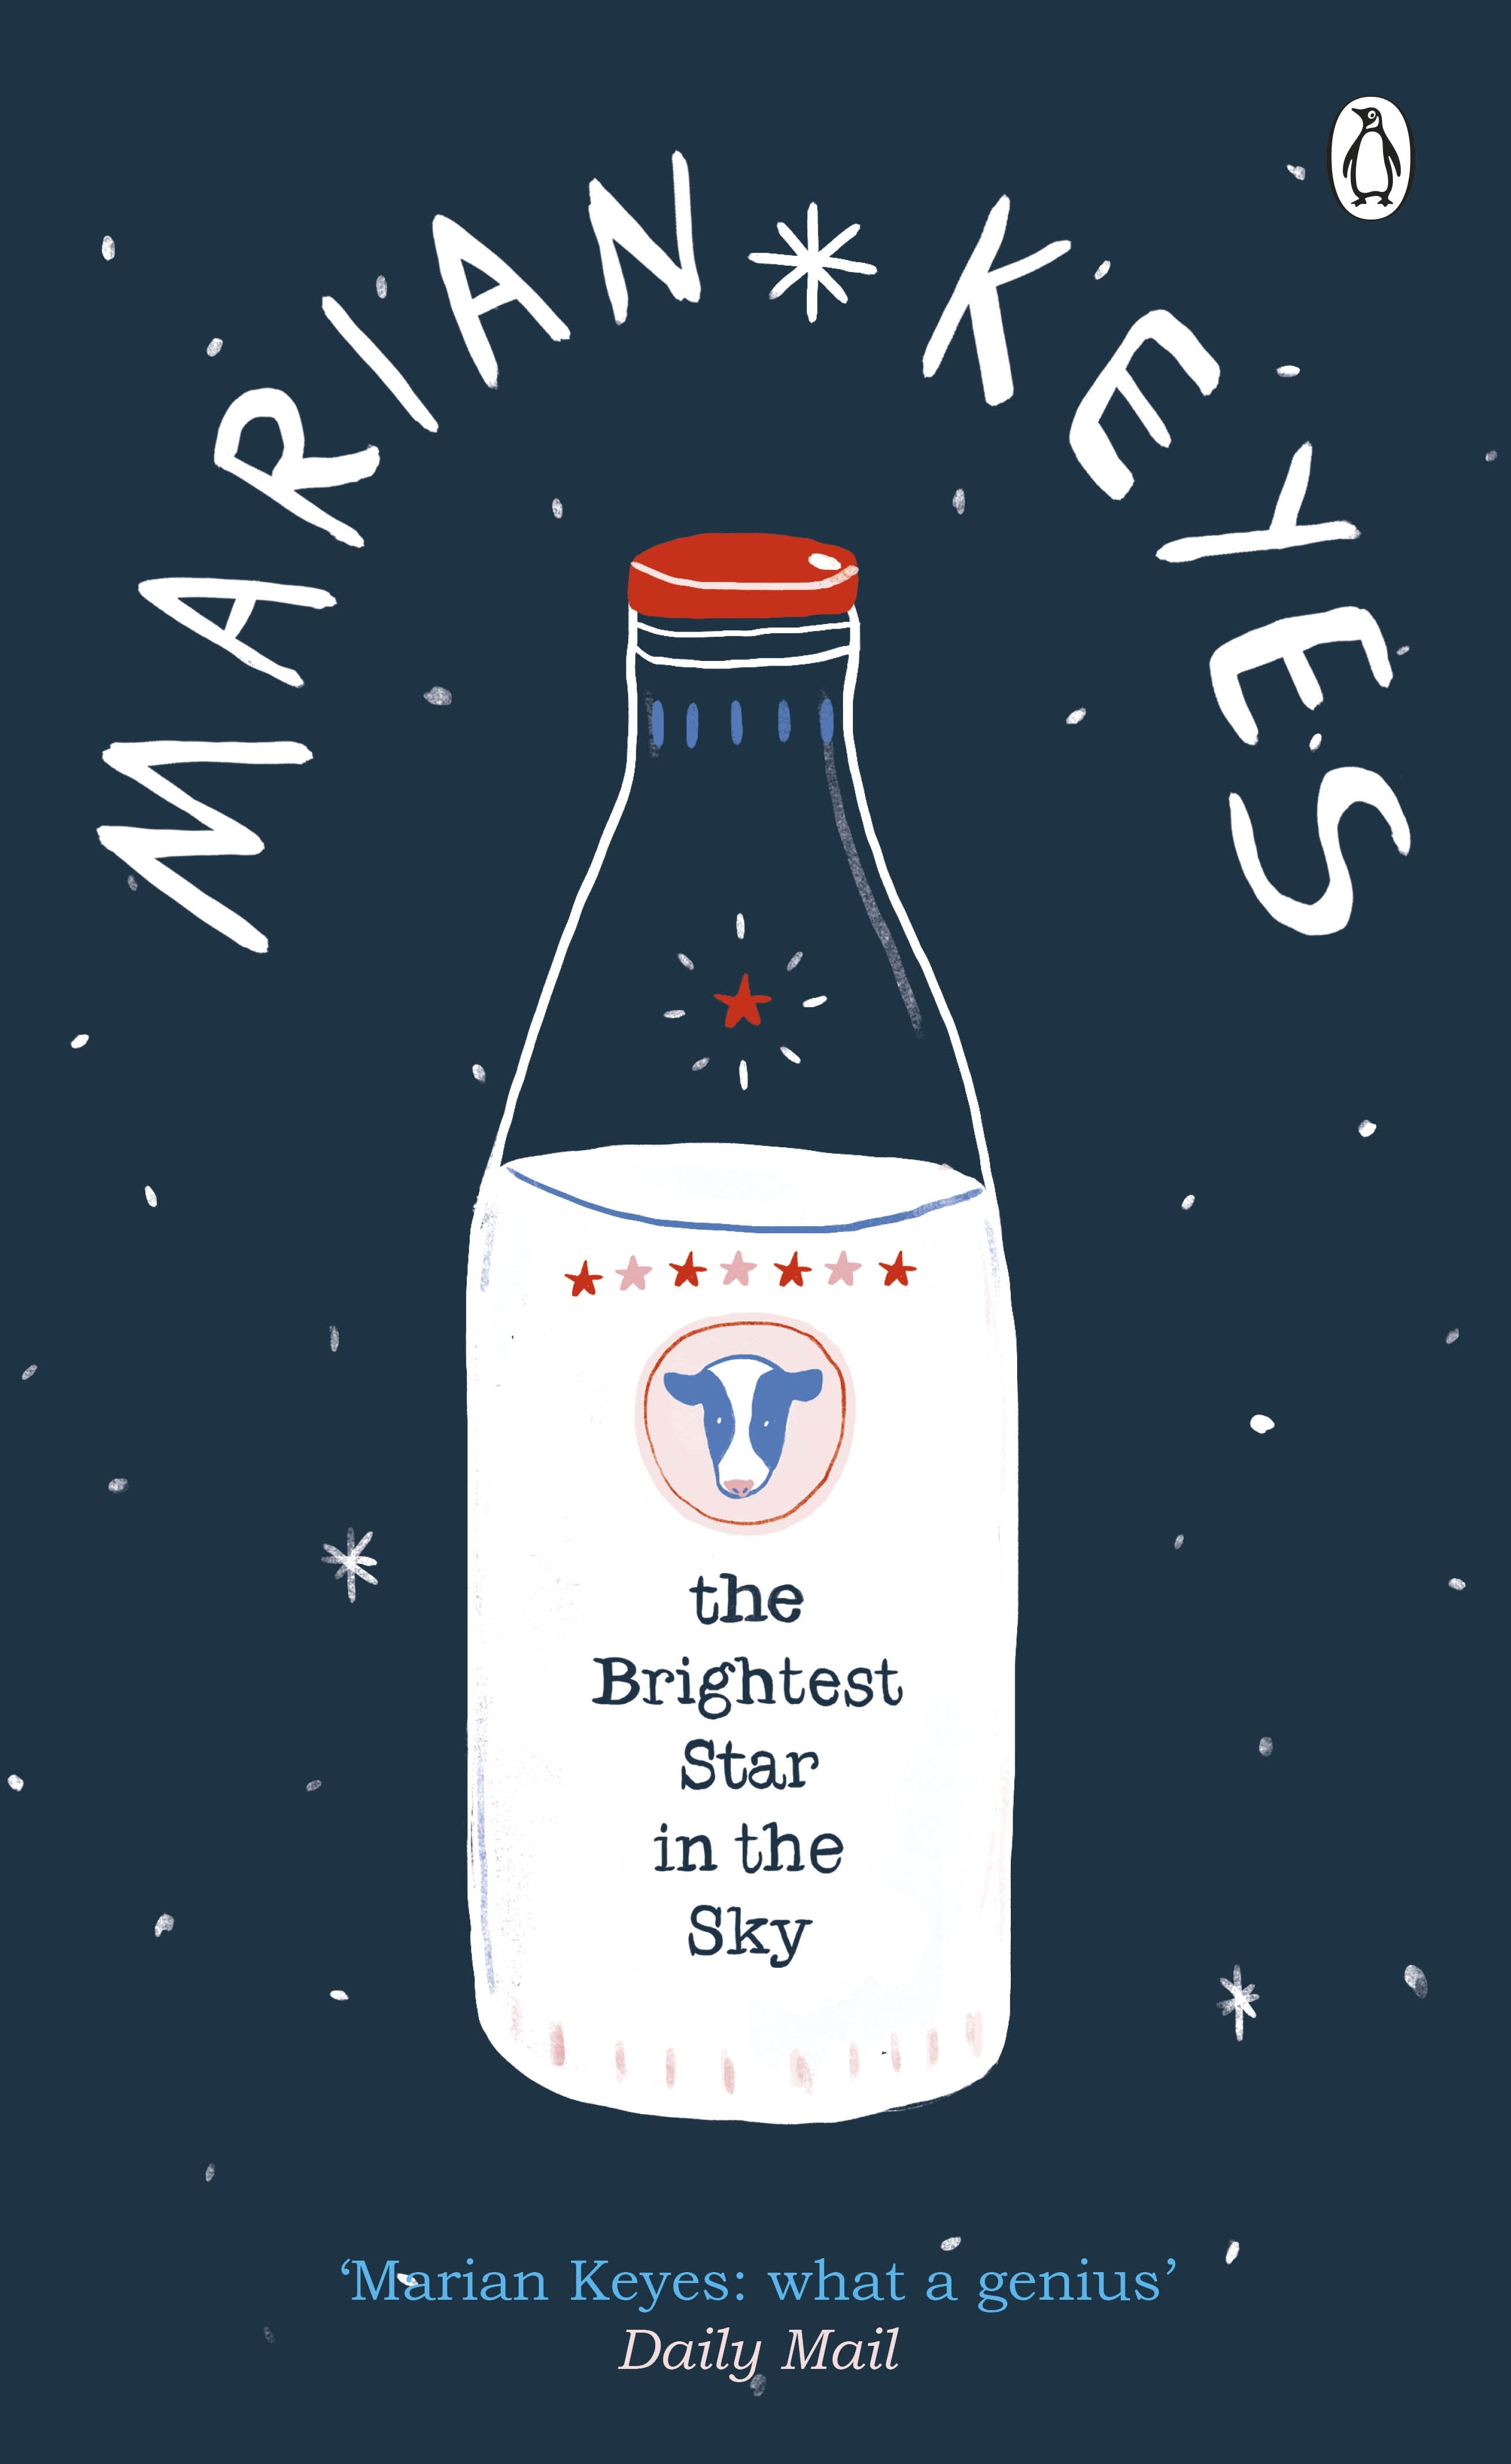 Book “The Brightest Star in the Sky” by Marian Keyes — July 25, 2019